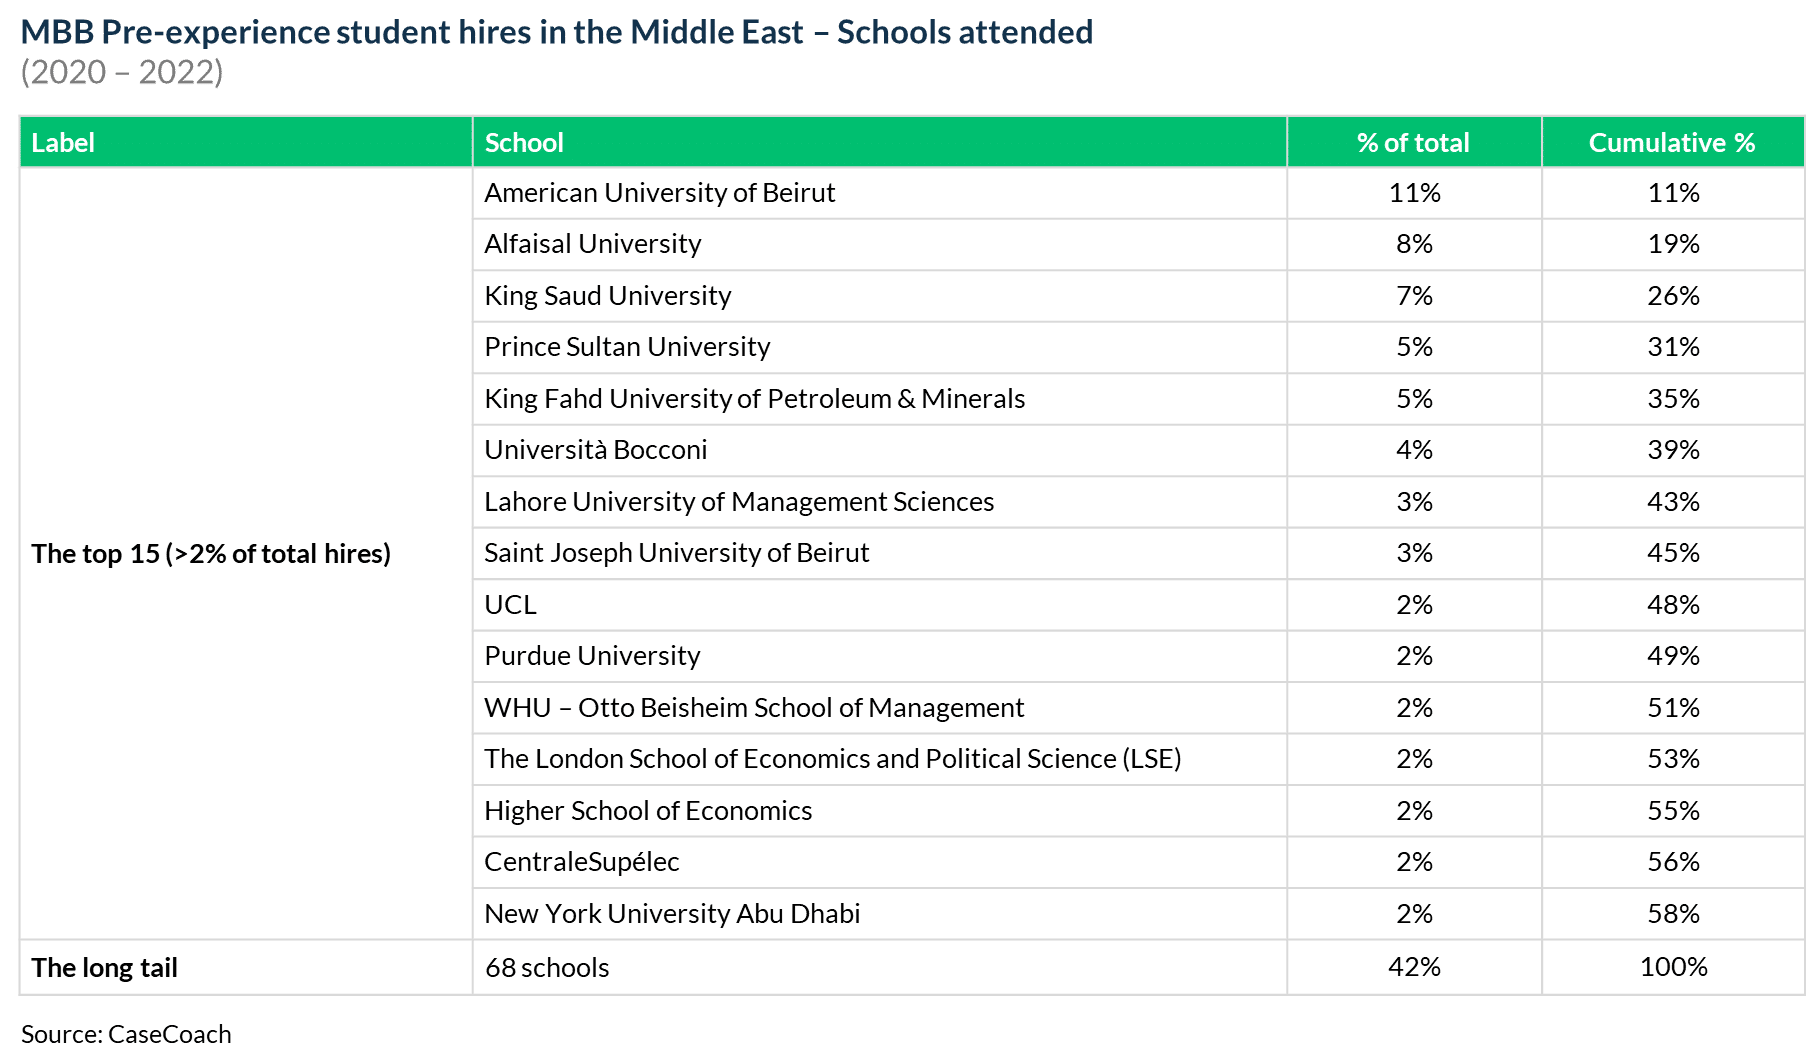 Universities attended by McKinsey, BCG, and Bain's pre-experience student hires in the Middle East